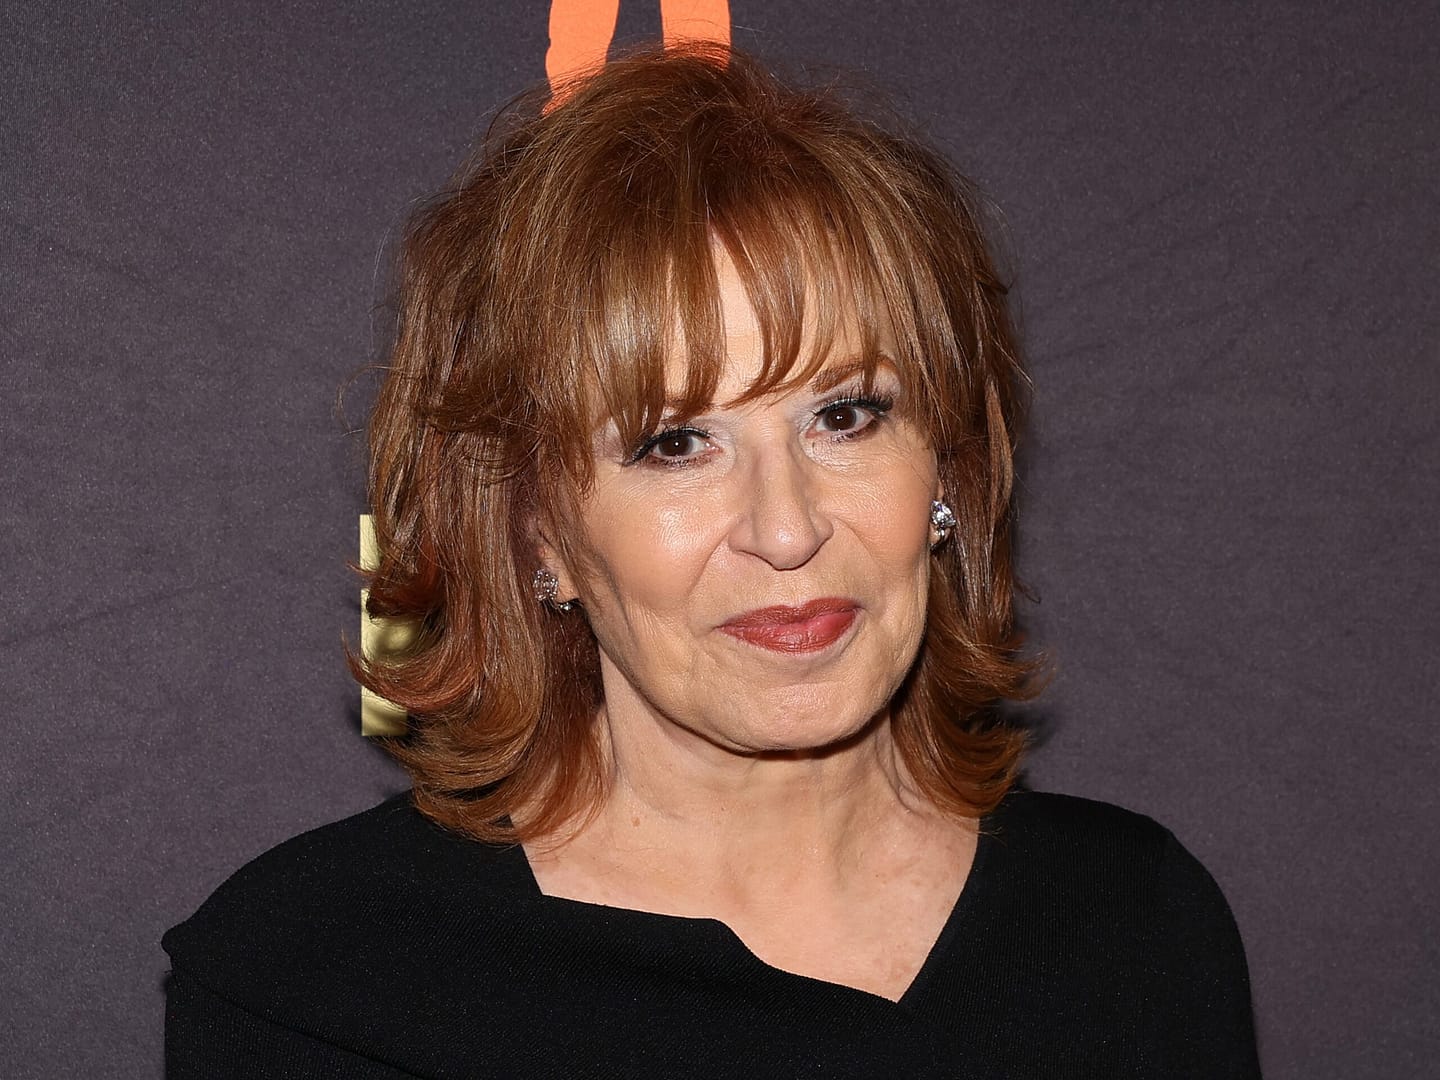 talk-show-host-joy-behar-dismisses-claims-that-gen-z-is-‘left-behind’-by-the-economy-and-tells-them-to-‘get-a-job’